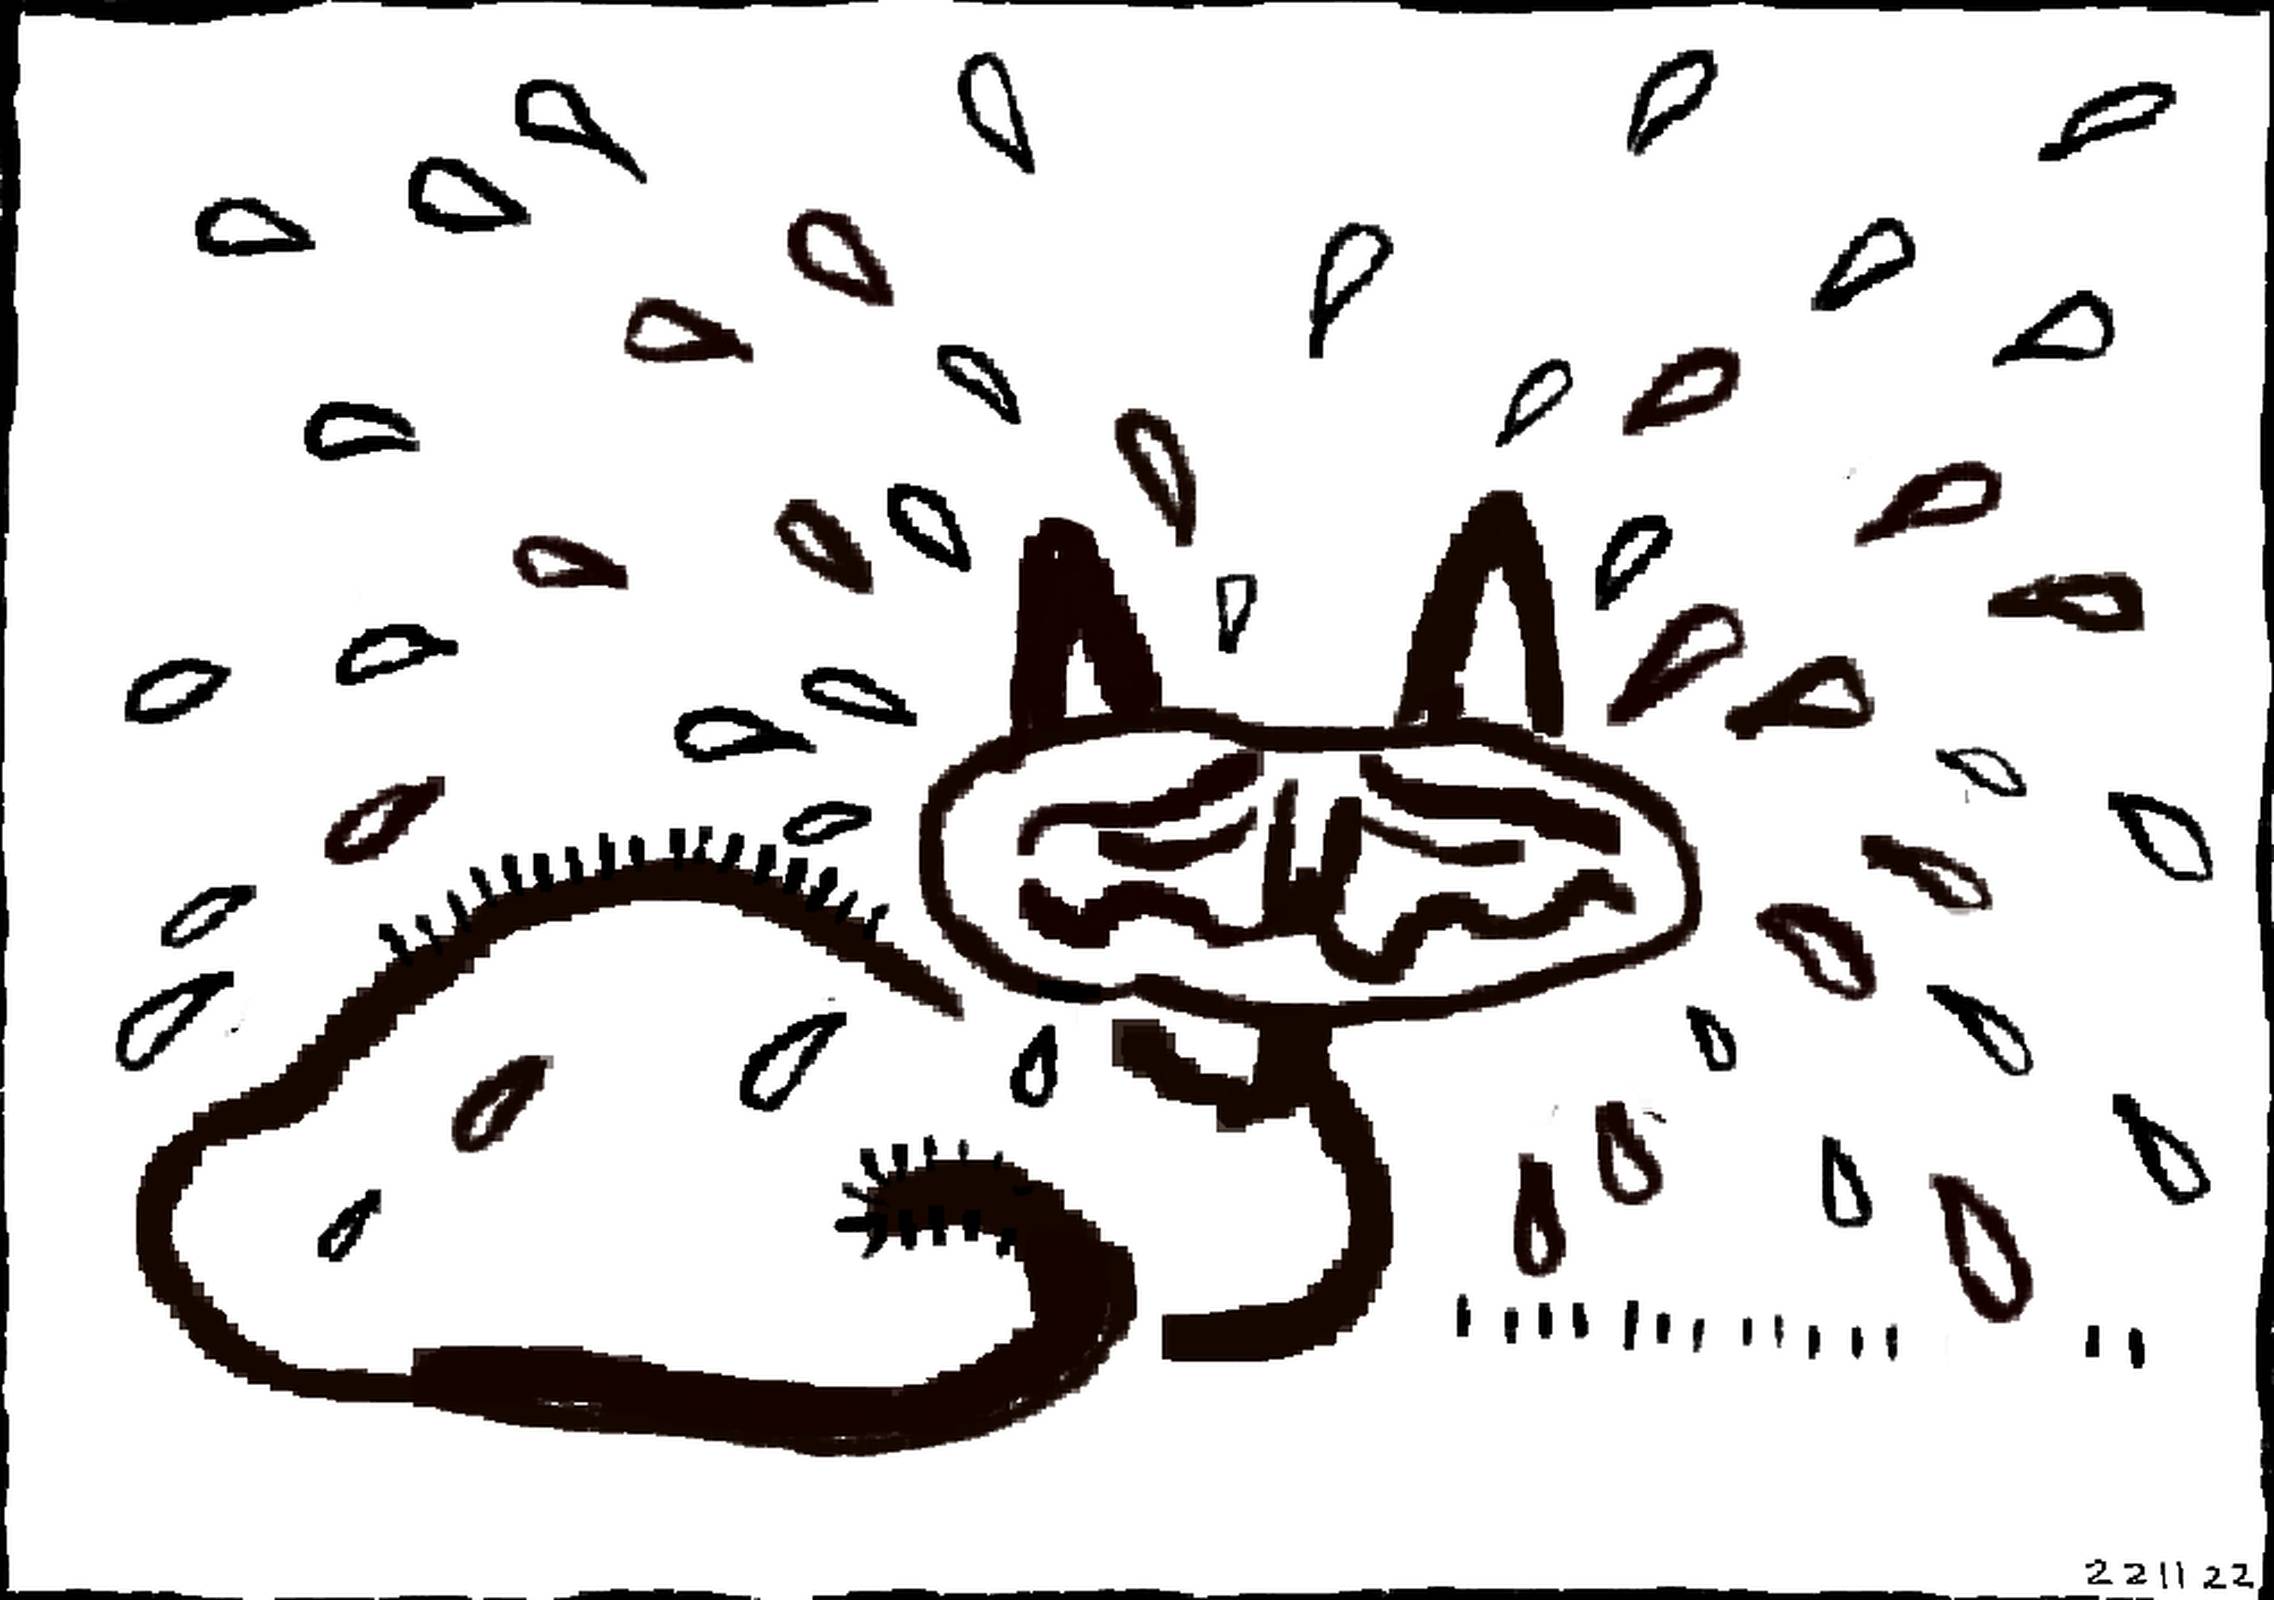 Sketch drawing of a cat crying many tears